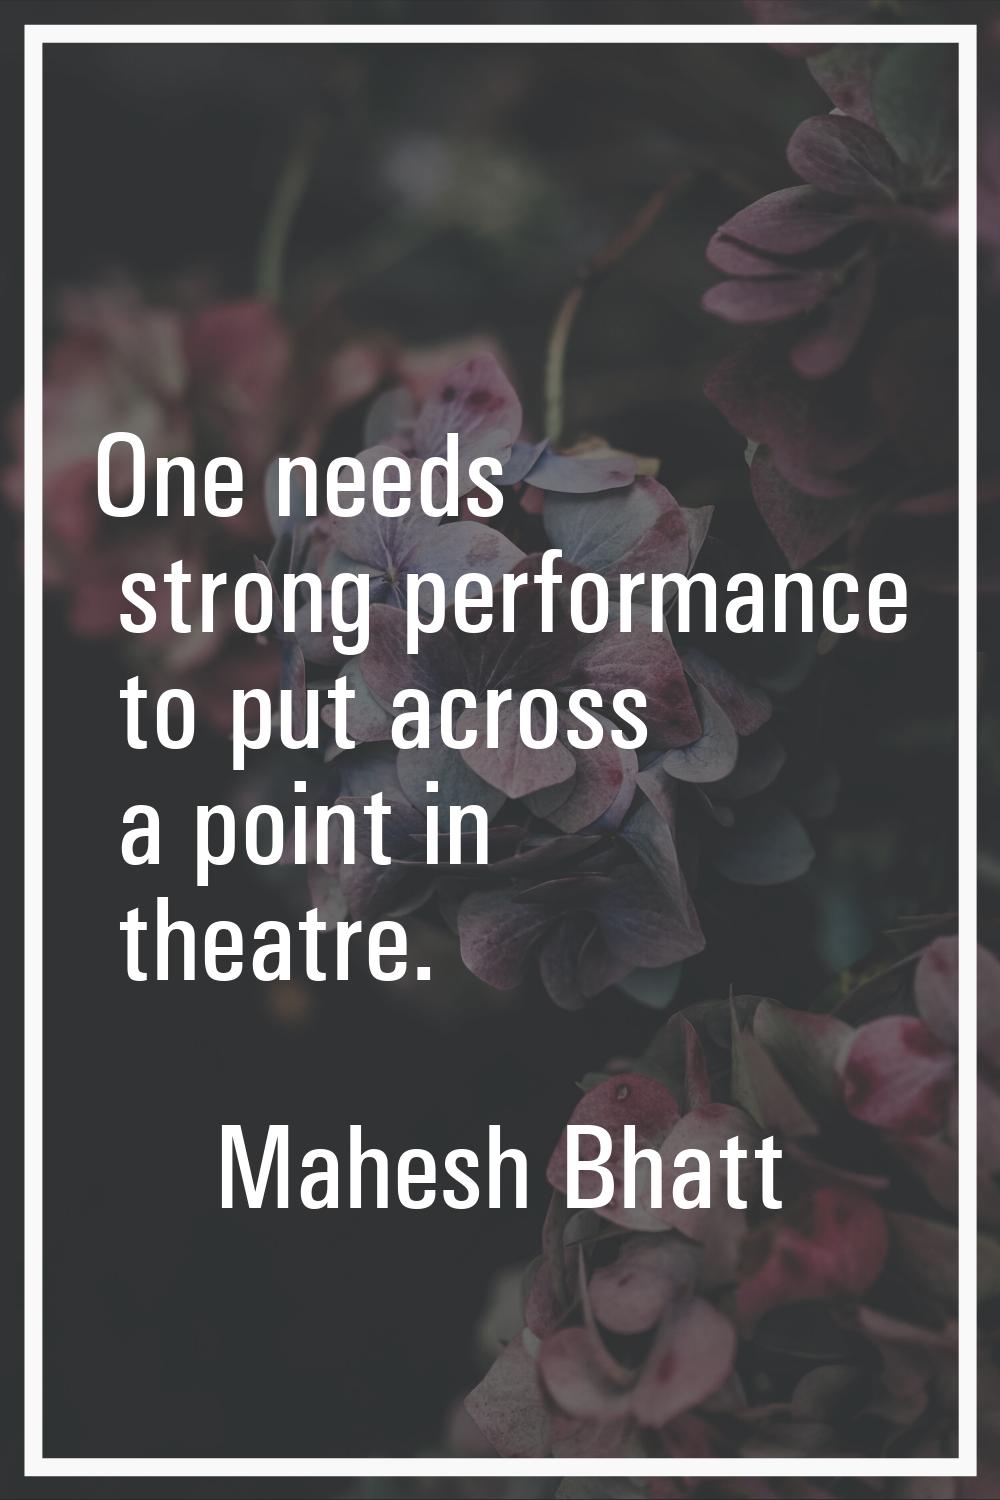 One needs strong performance to put across a point in theatre.